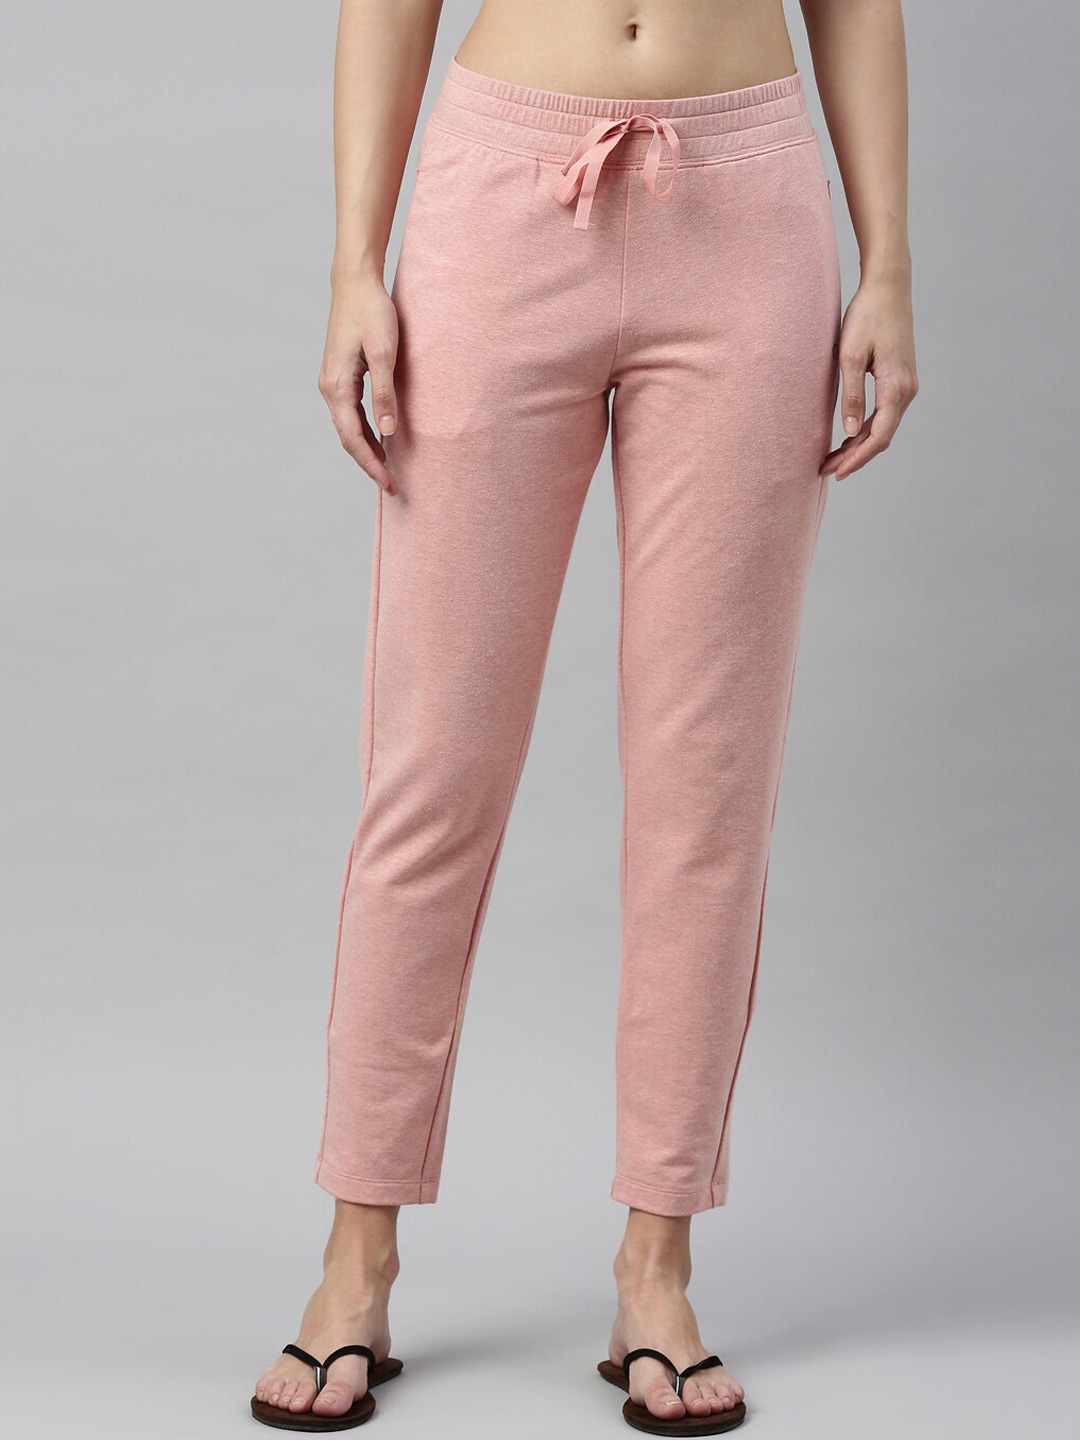 Enamor Women Pink Solid Cotton Slim-Fit Lounge Pants Price in India